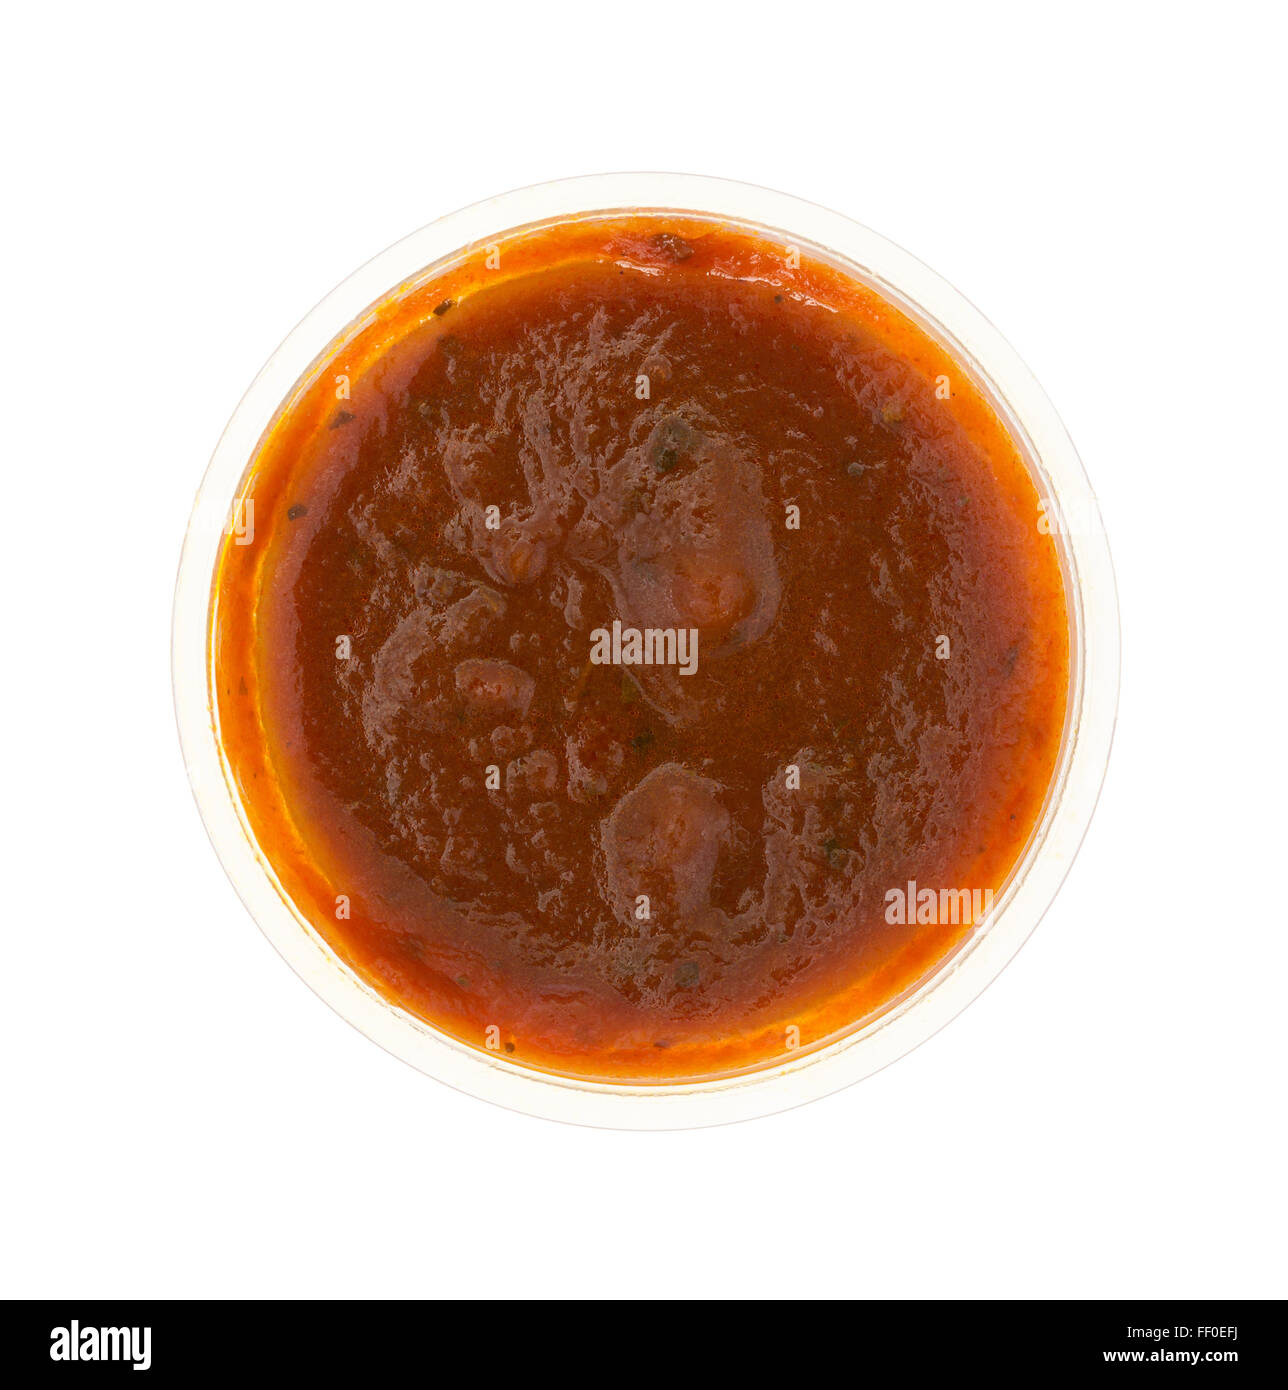 1,744 Sauce Plastic Take Away Container Images, Stock Photos, 3D